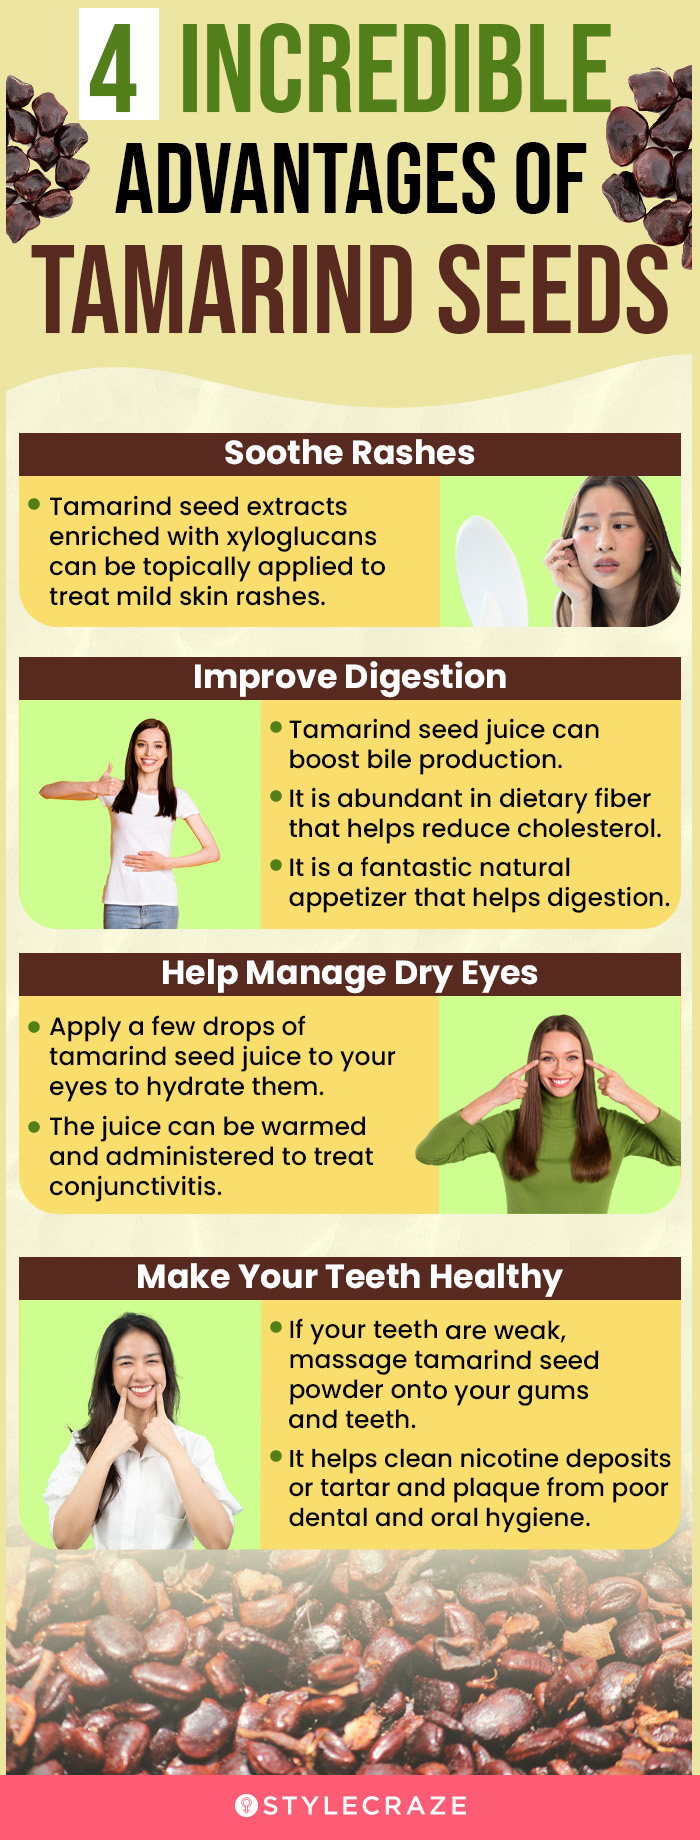 4 incredible advantages of tamarind seeds (infographic)